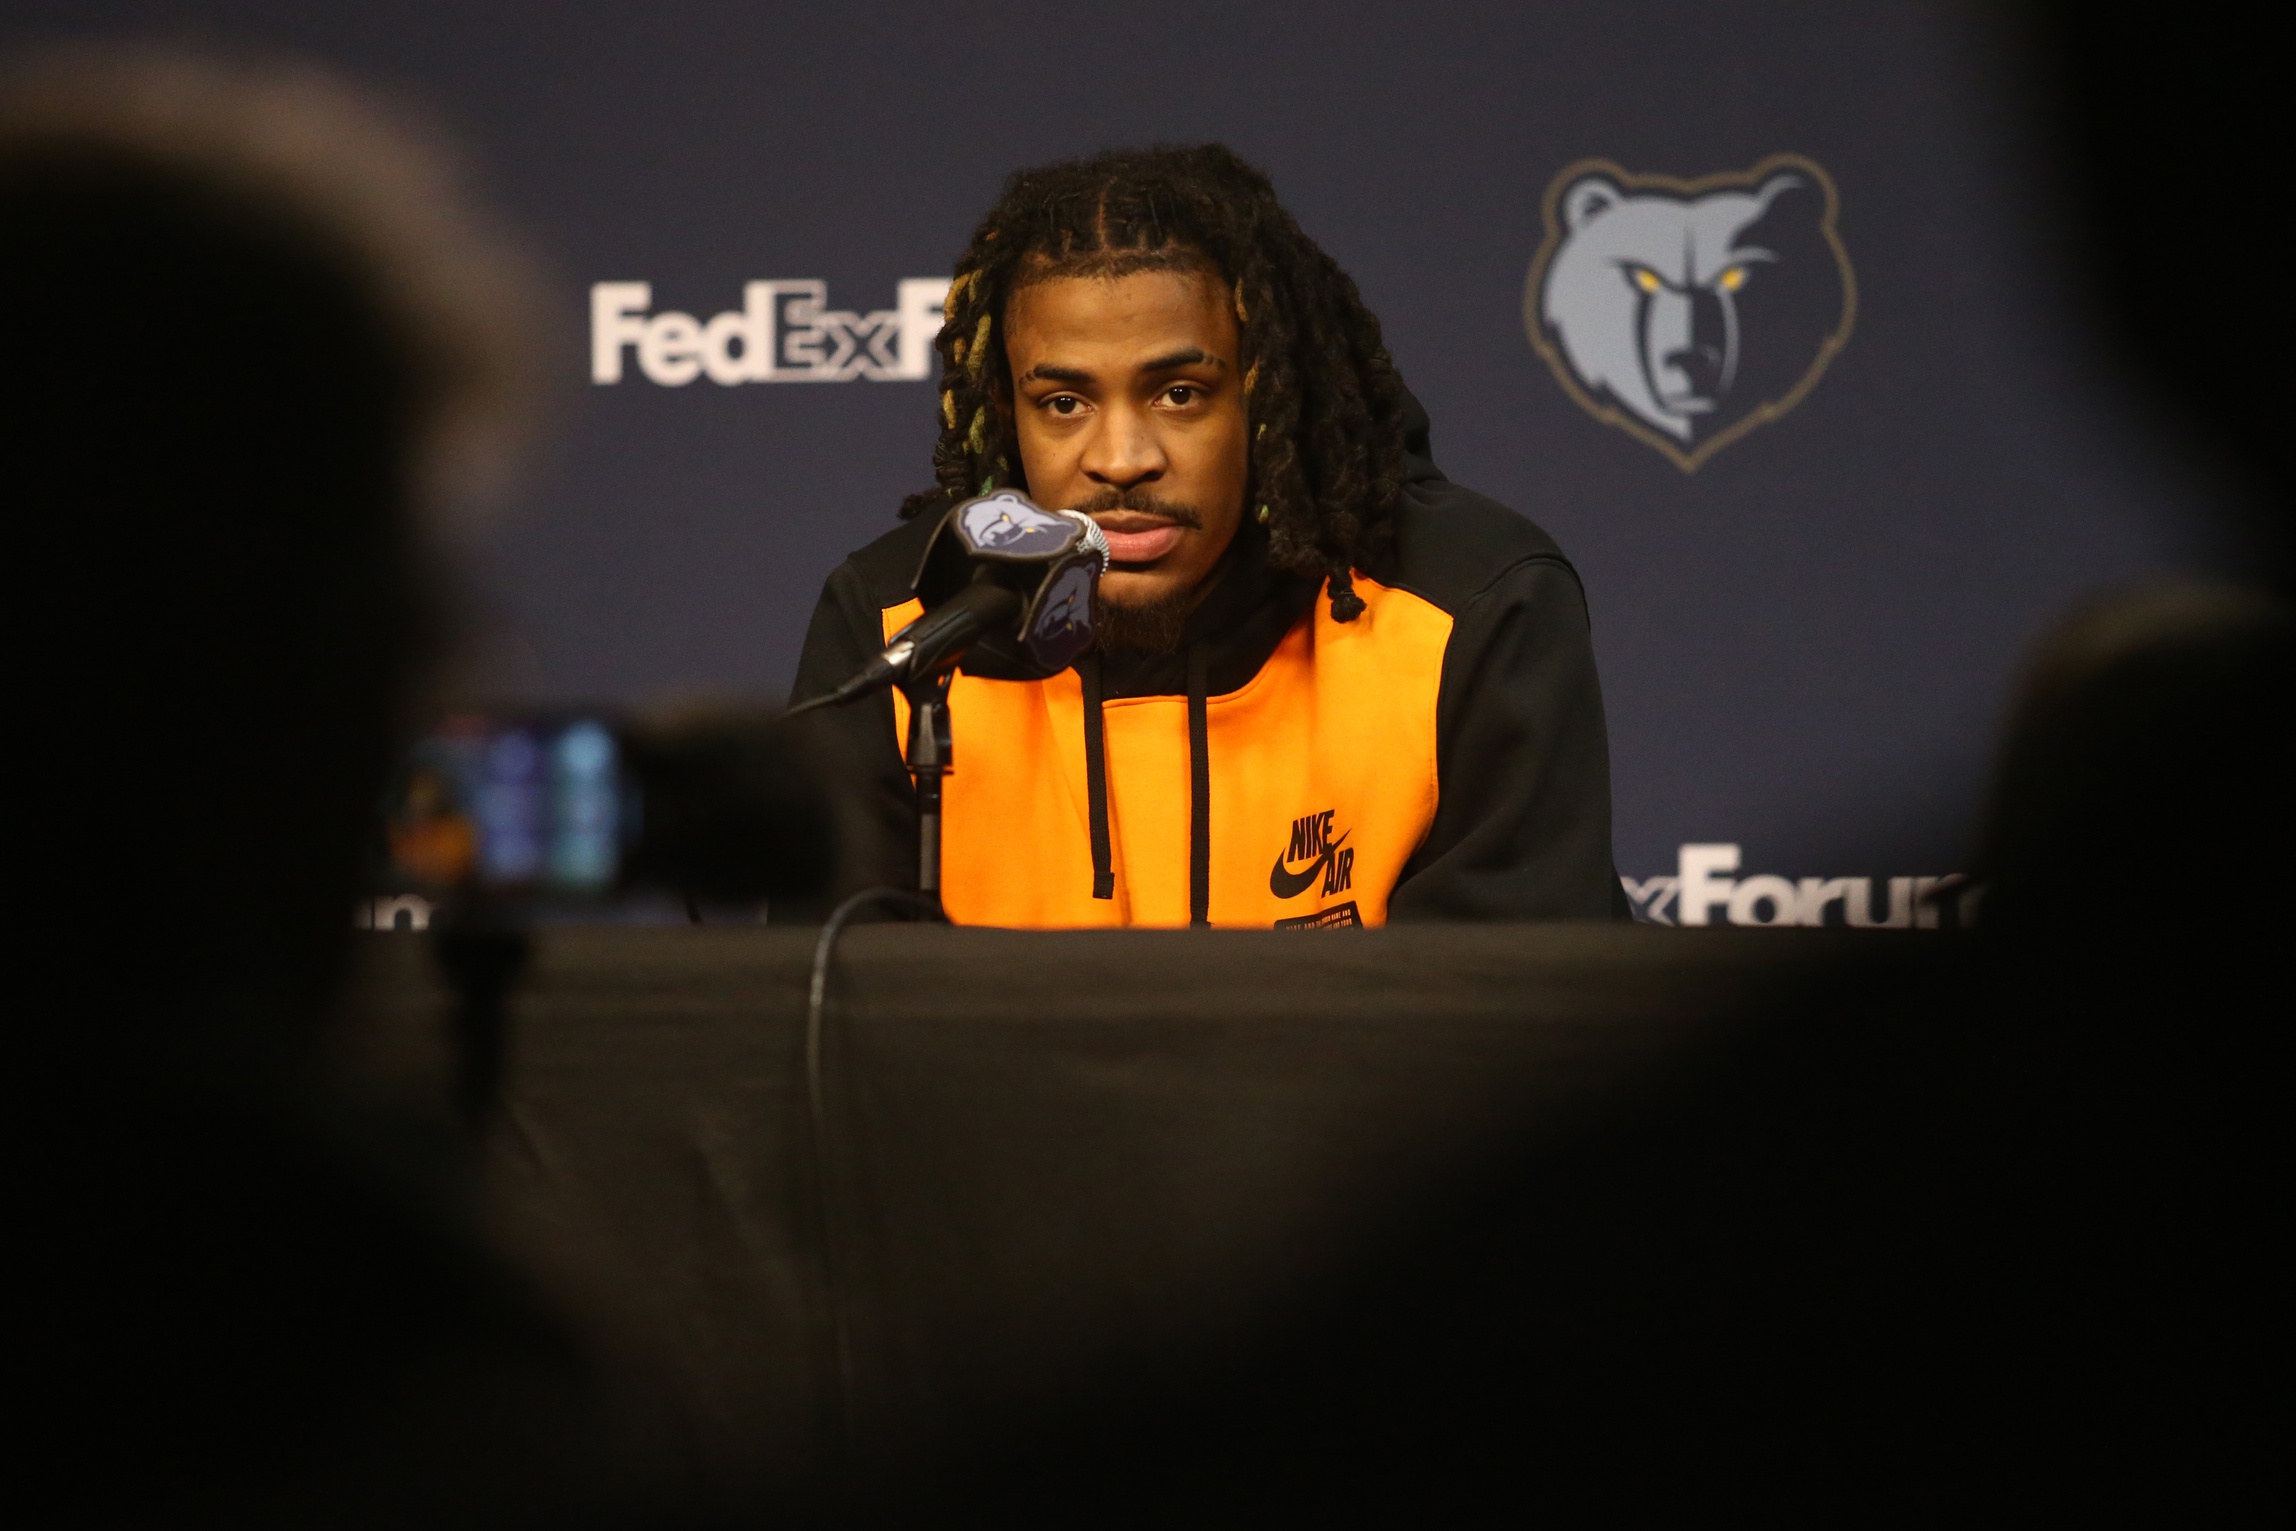 Memphis Grizzlies guard Ja Morant answers questions from media about his time away from the team during his 25 game suspension during a press conference at FedExForum.